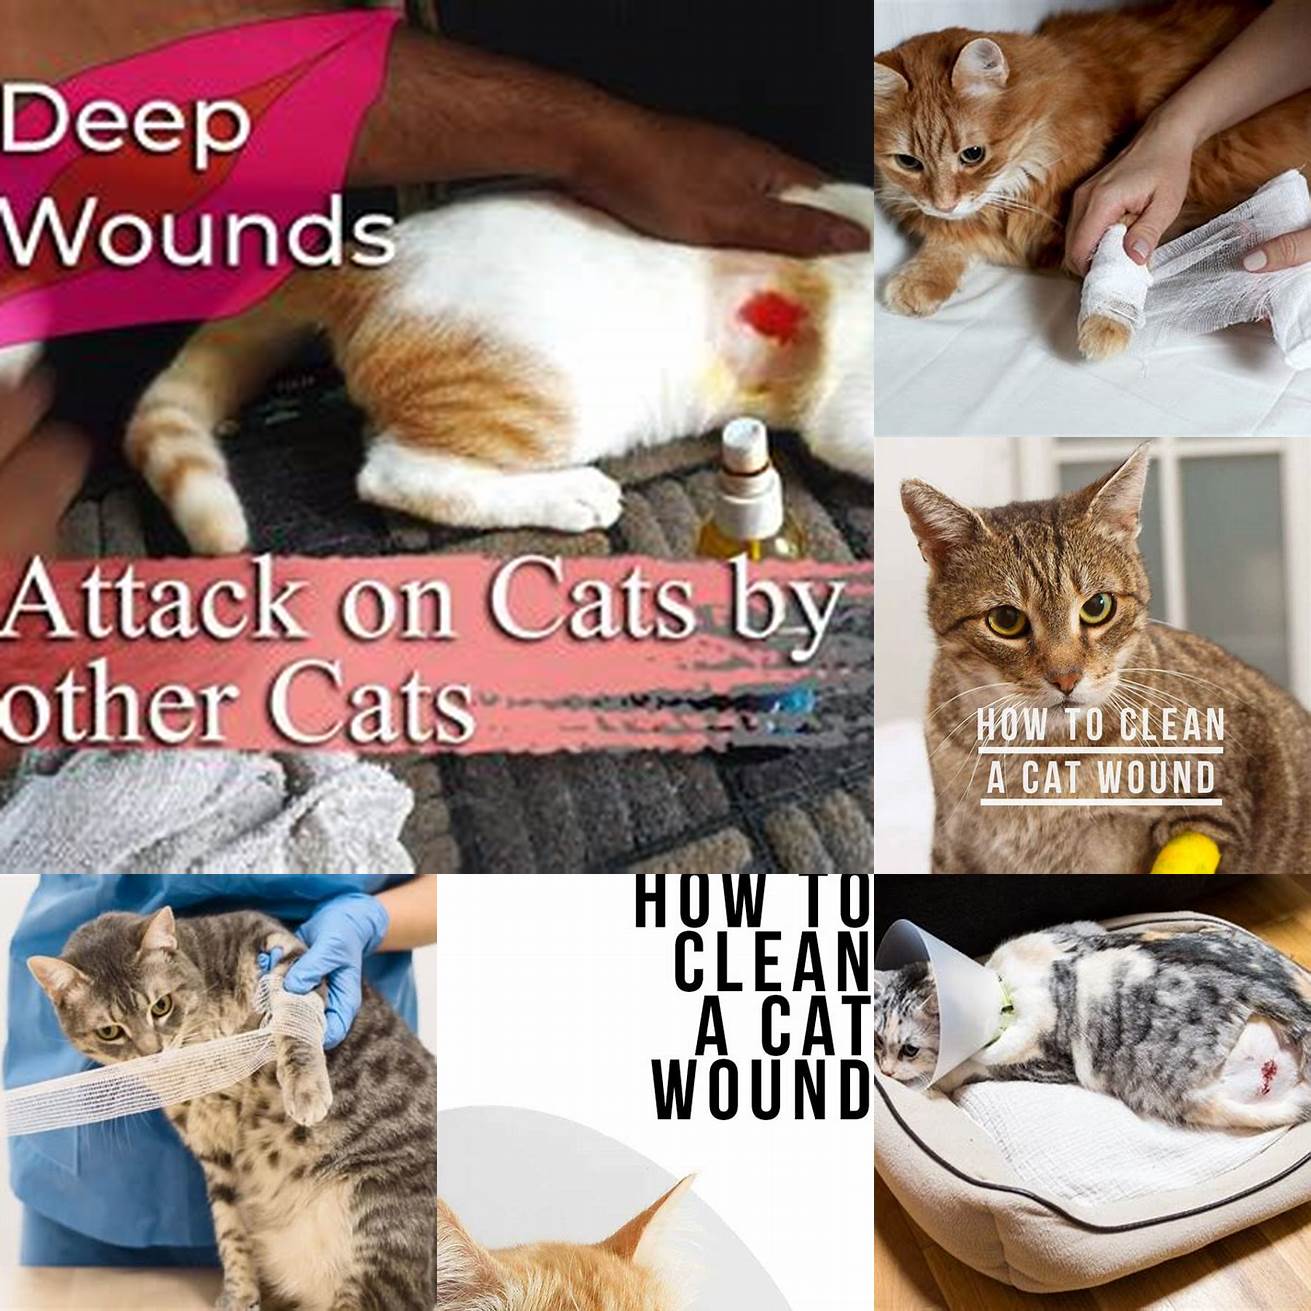 6 Keep the wound clean